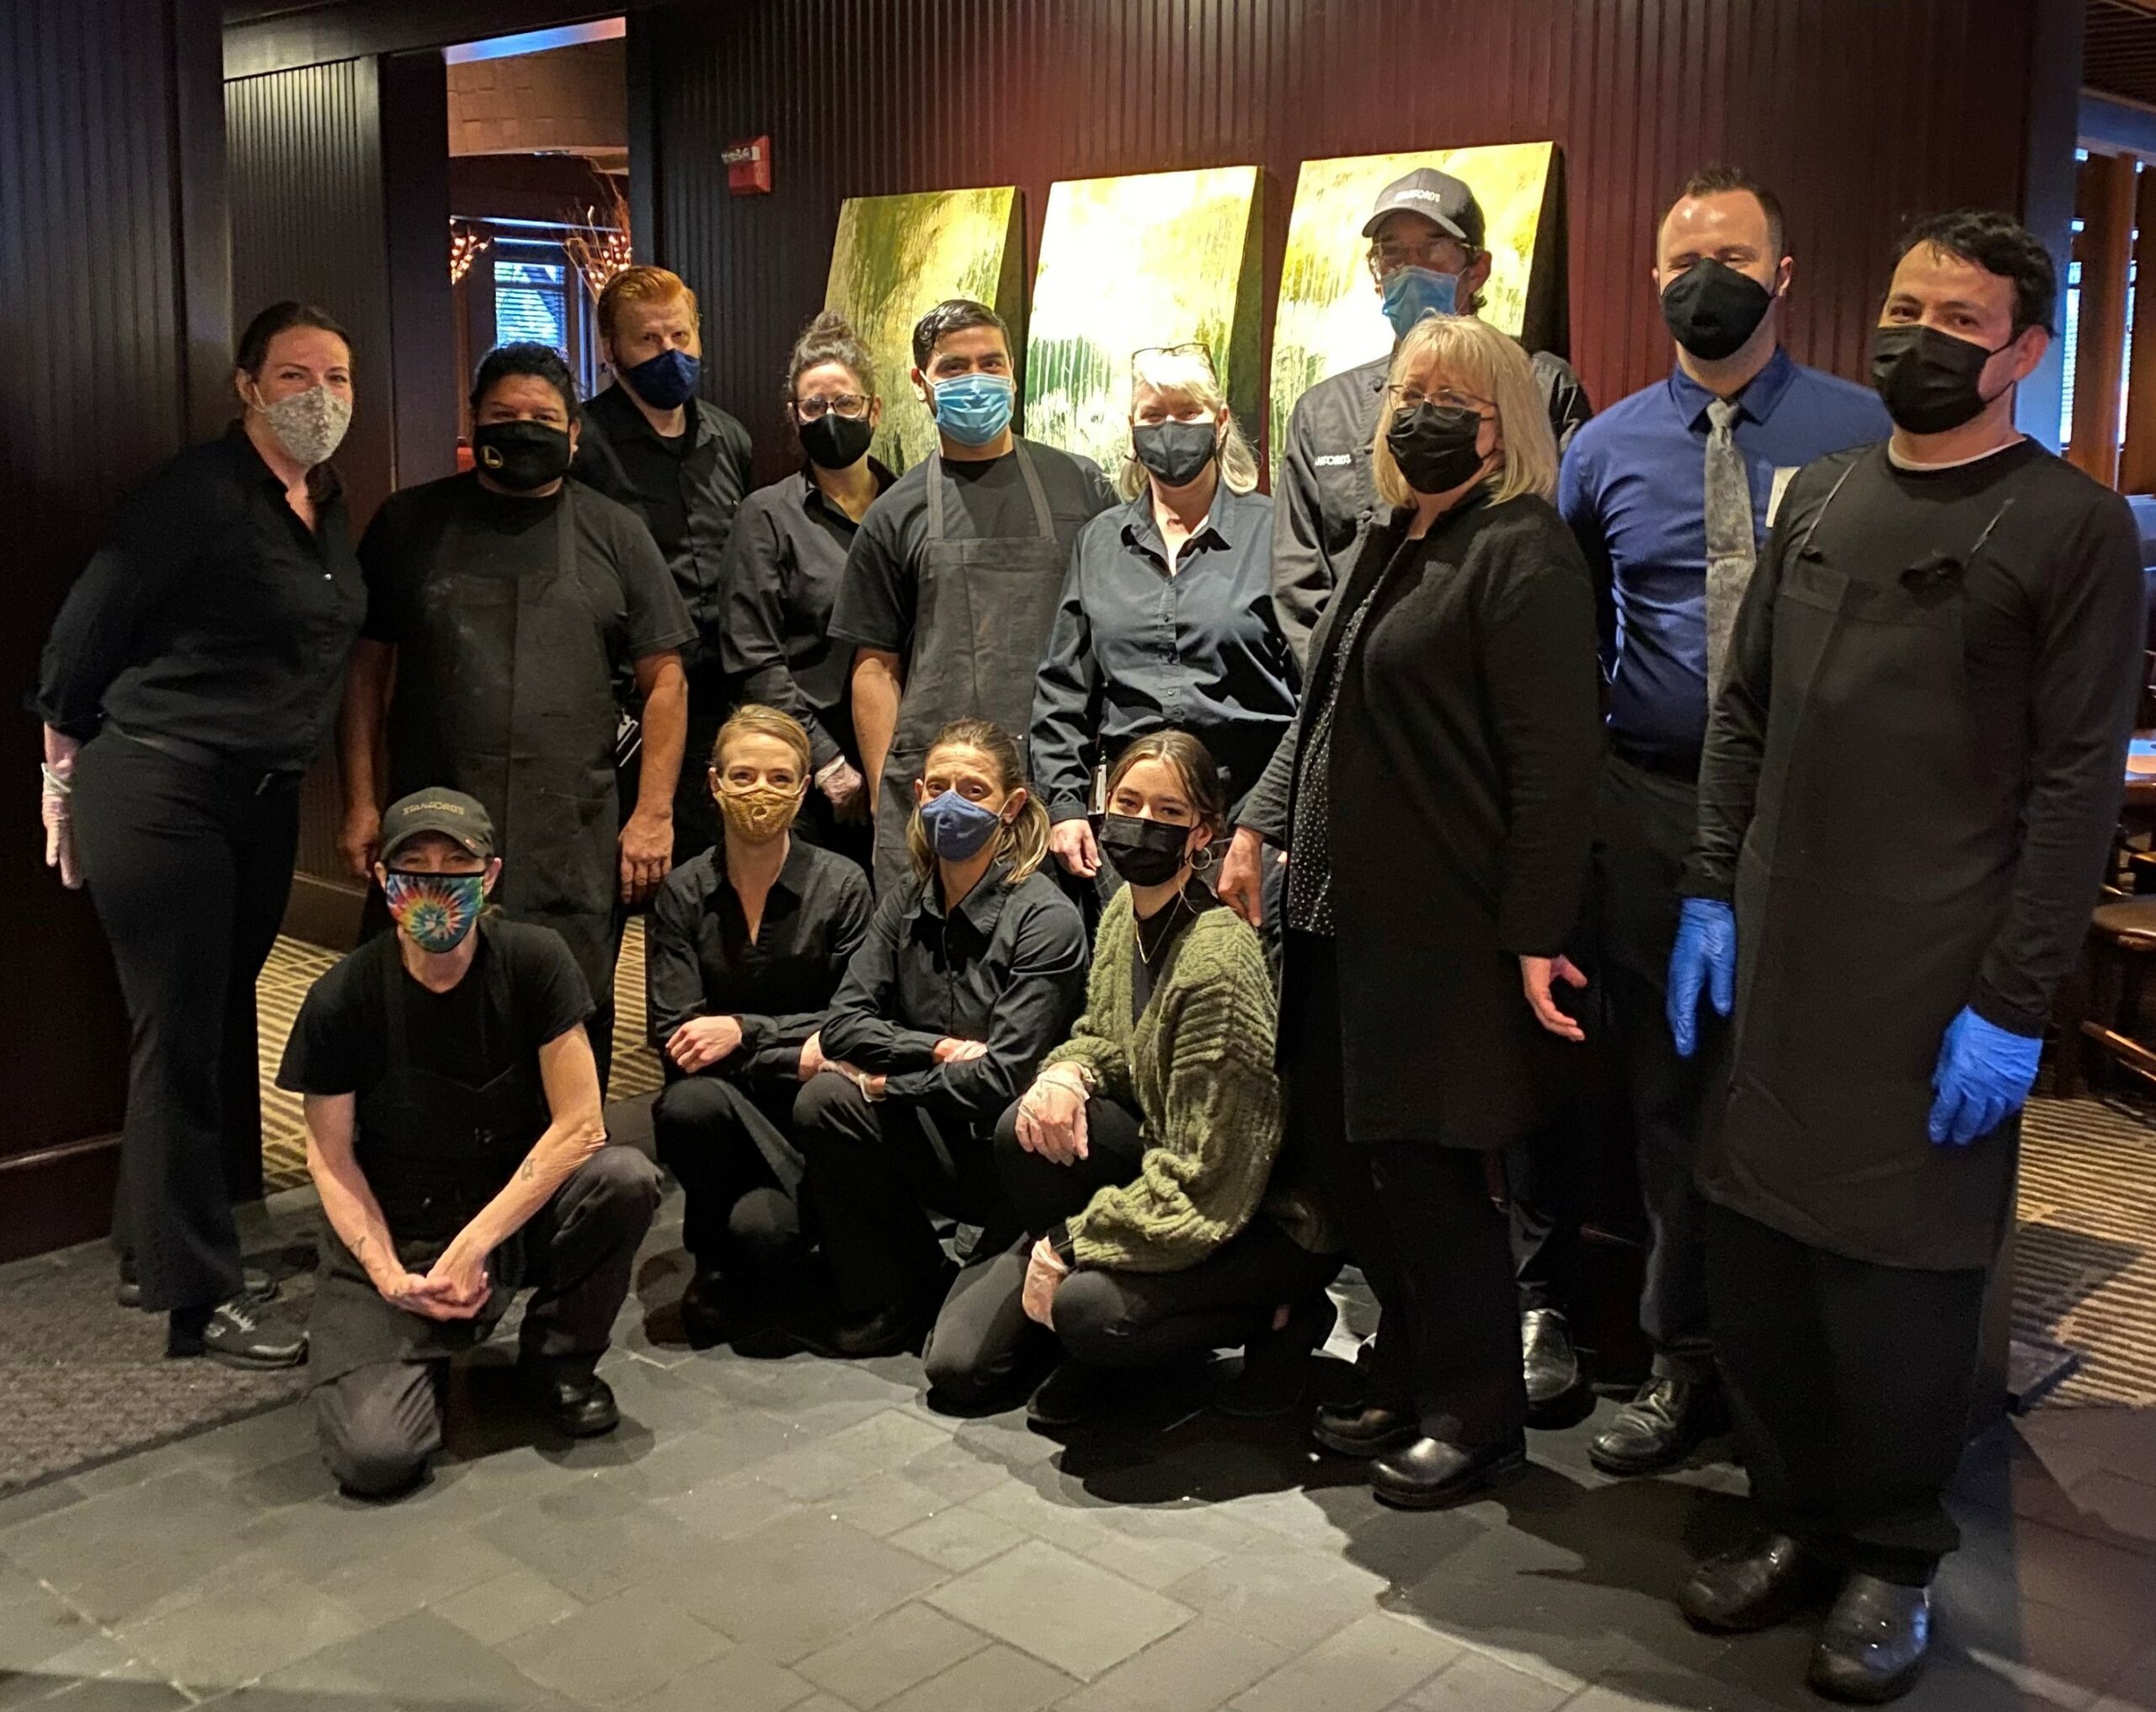 Clackamas steakhouse staff following covid safety rules with masks